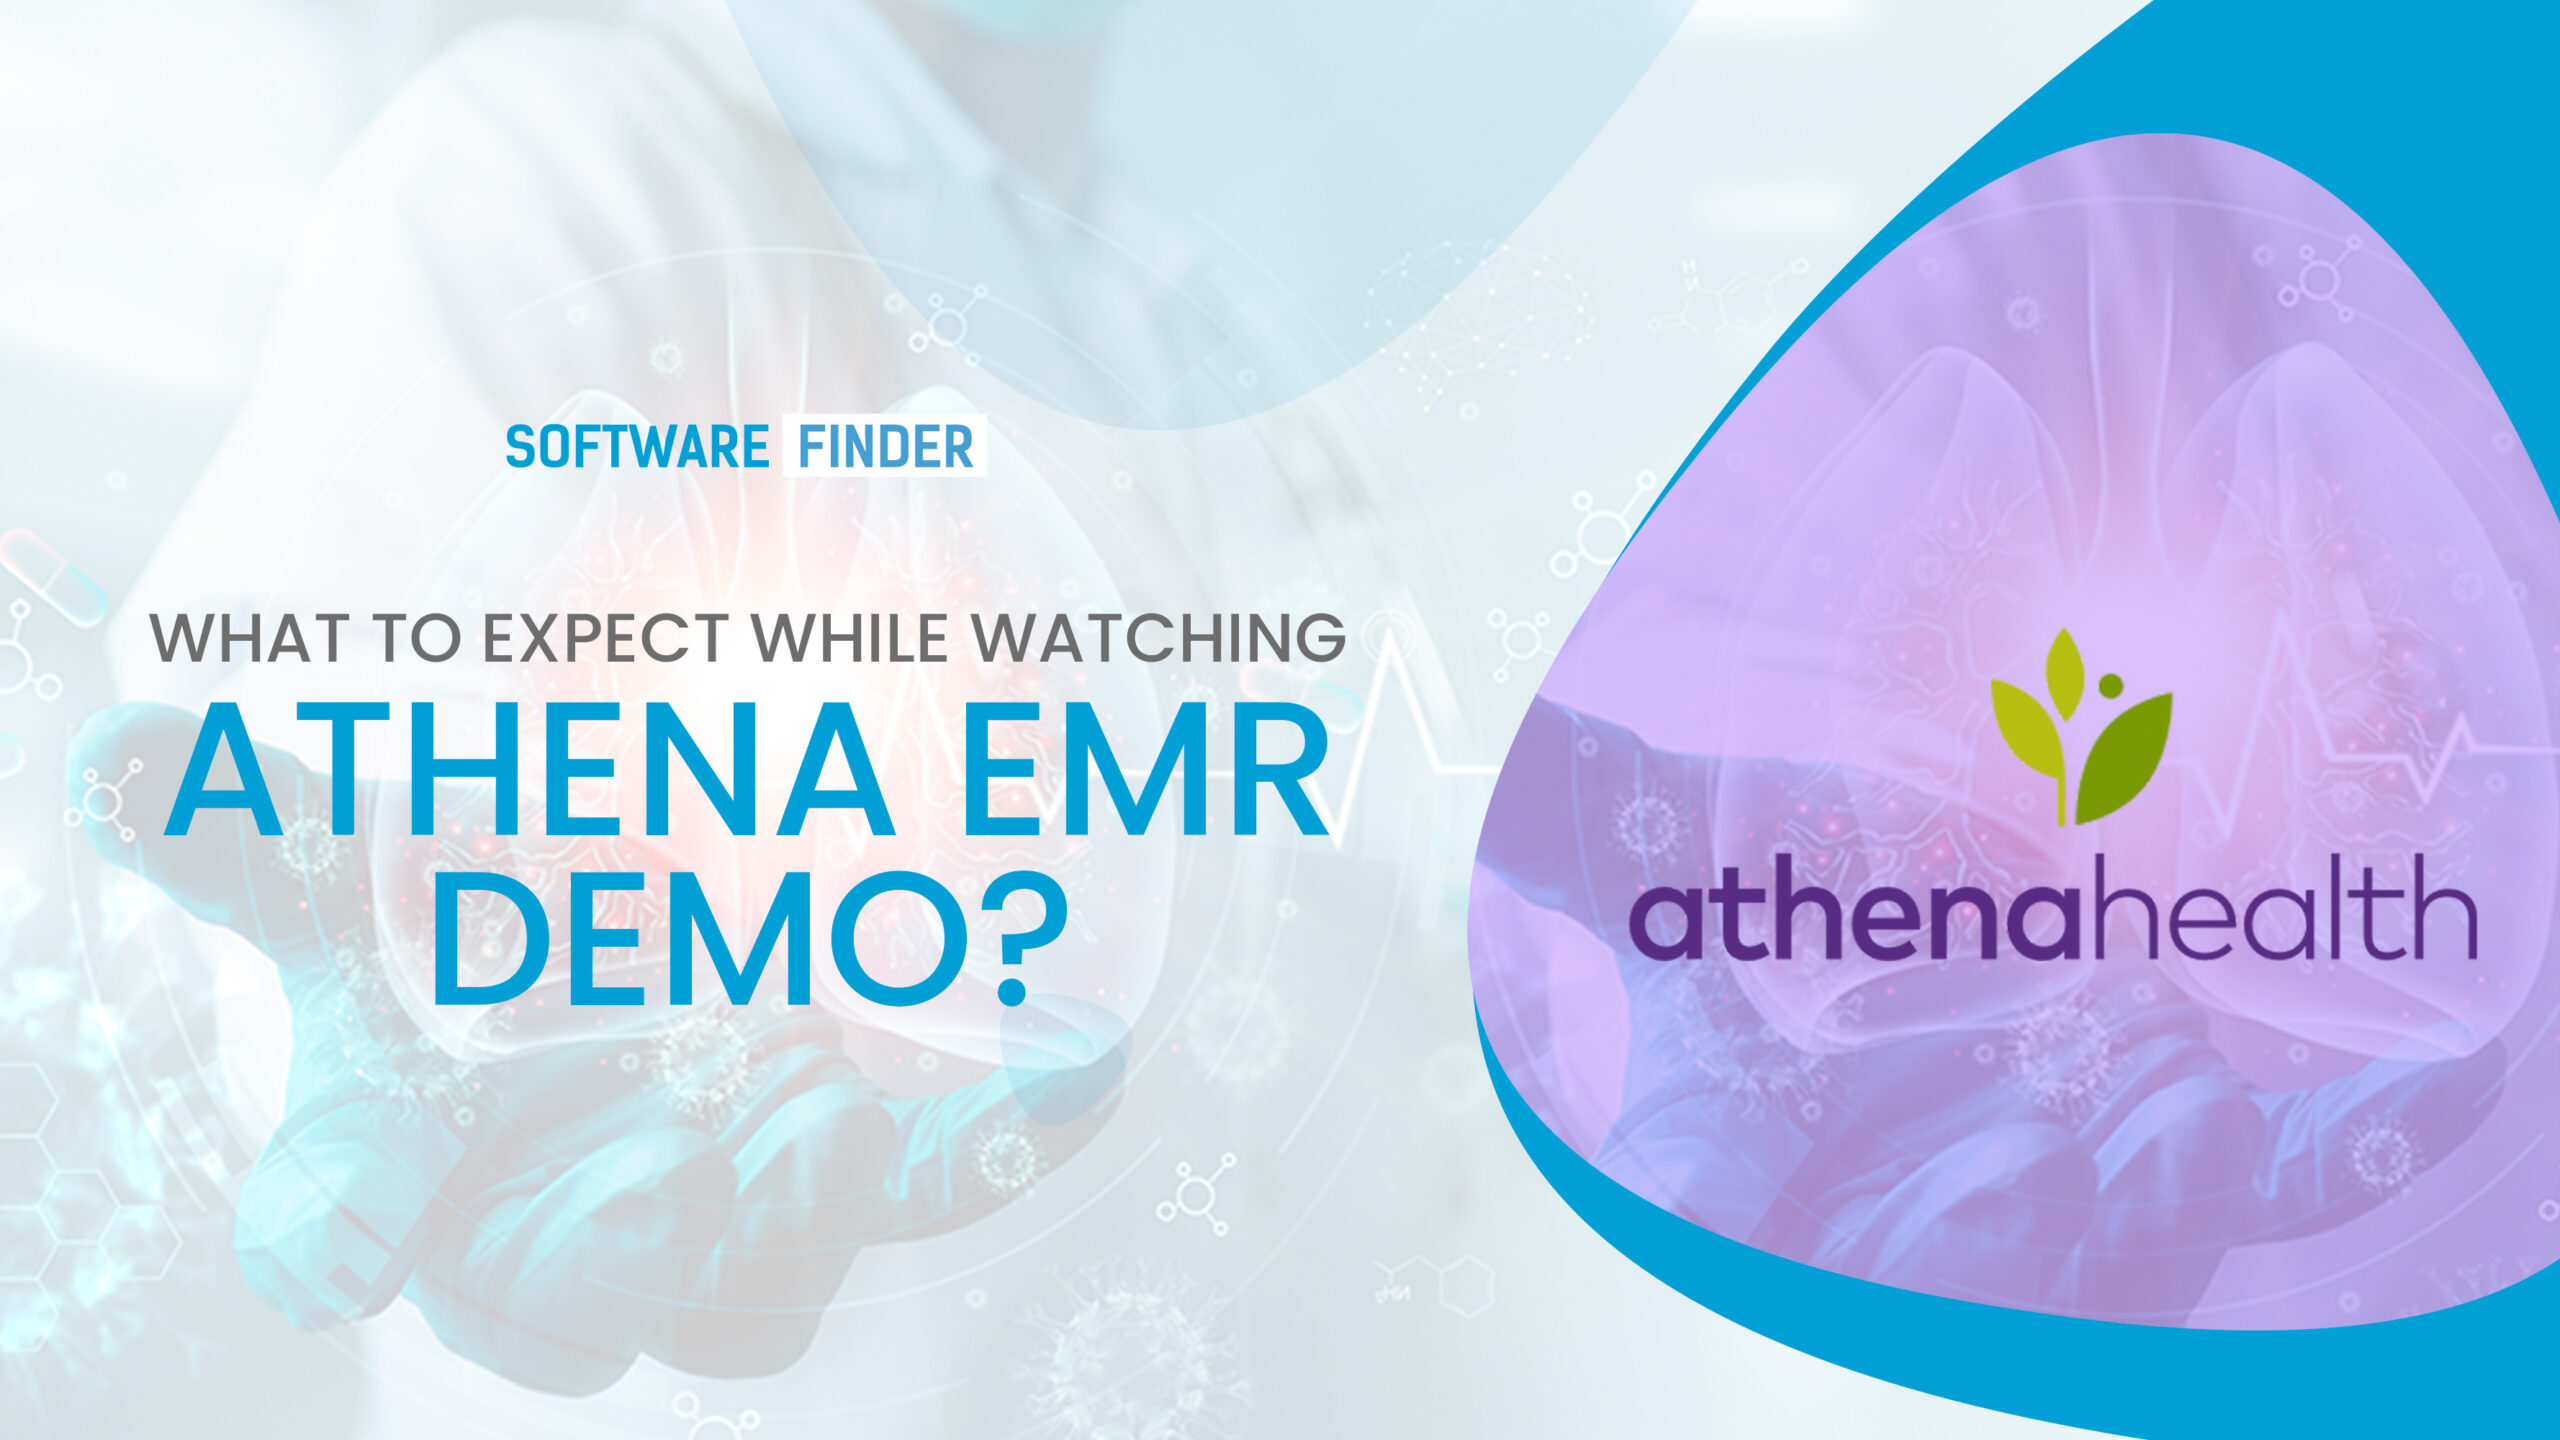 What to Expect While Watching athena EMR Demo